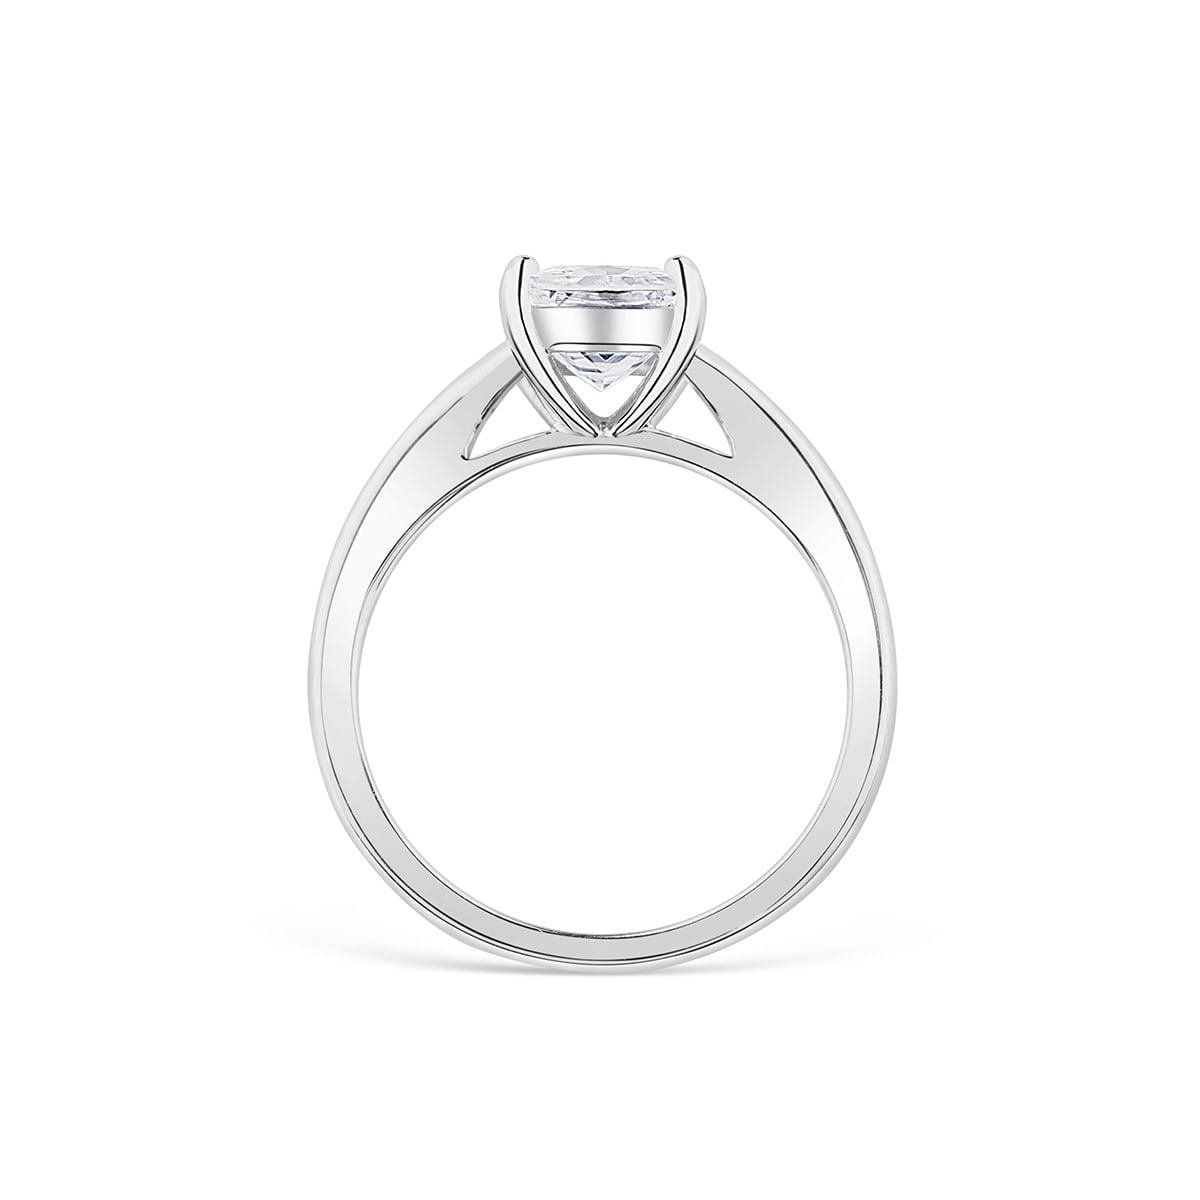 the layla silver cushion cut solitaire setting